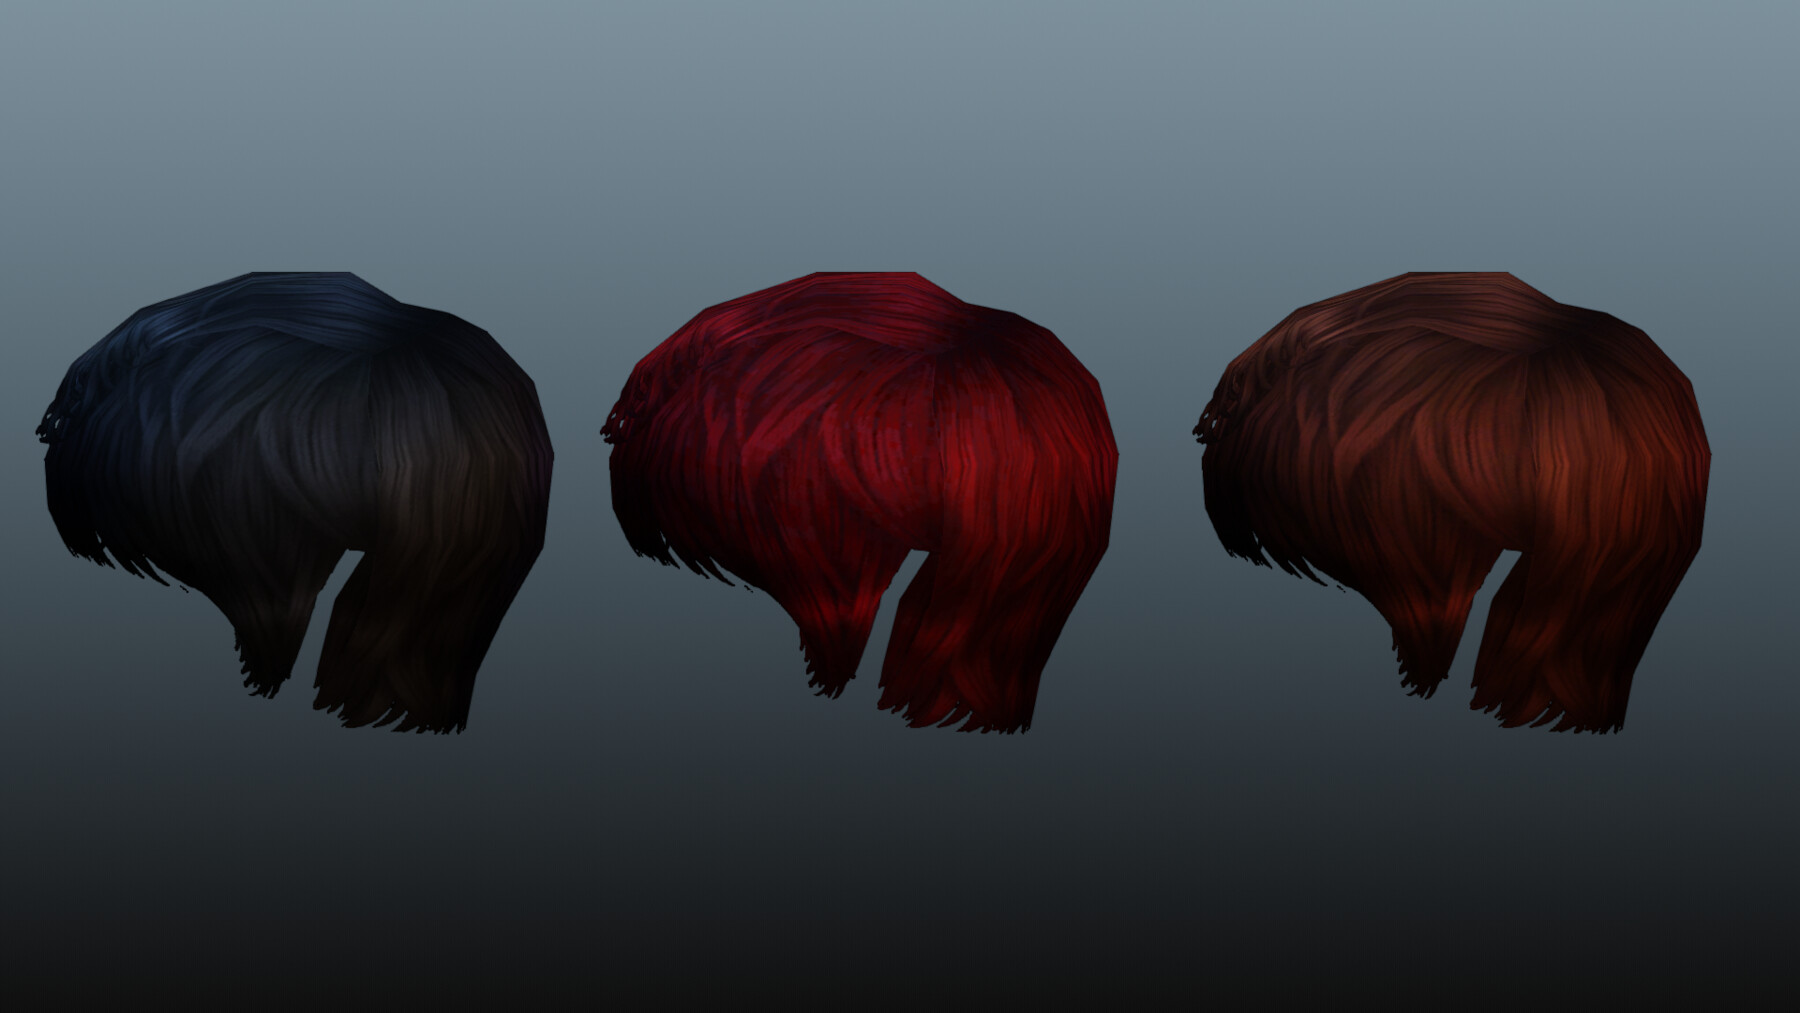 ArtStation - Female Colorable Hair With Accessorie